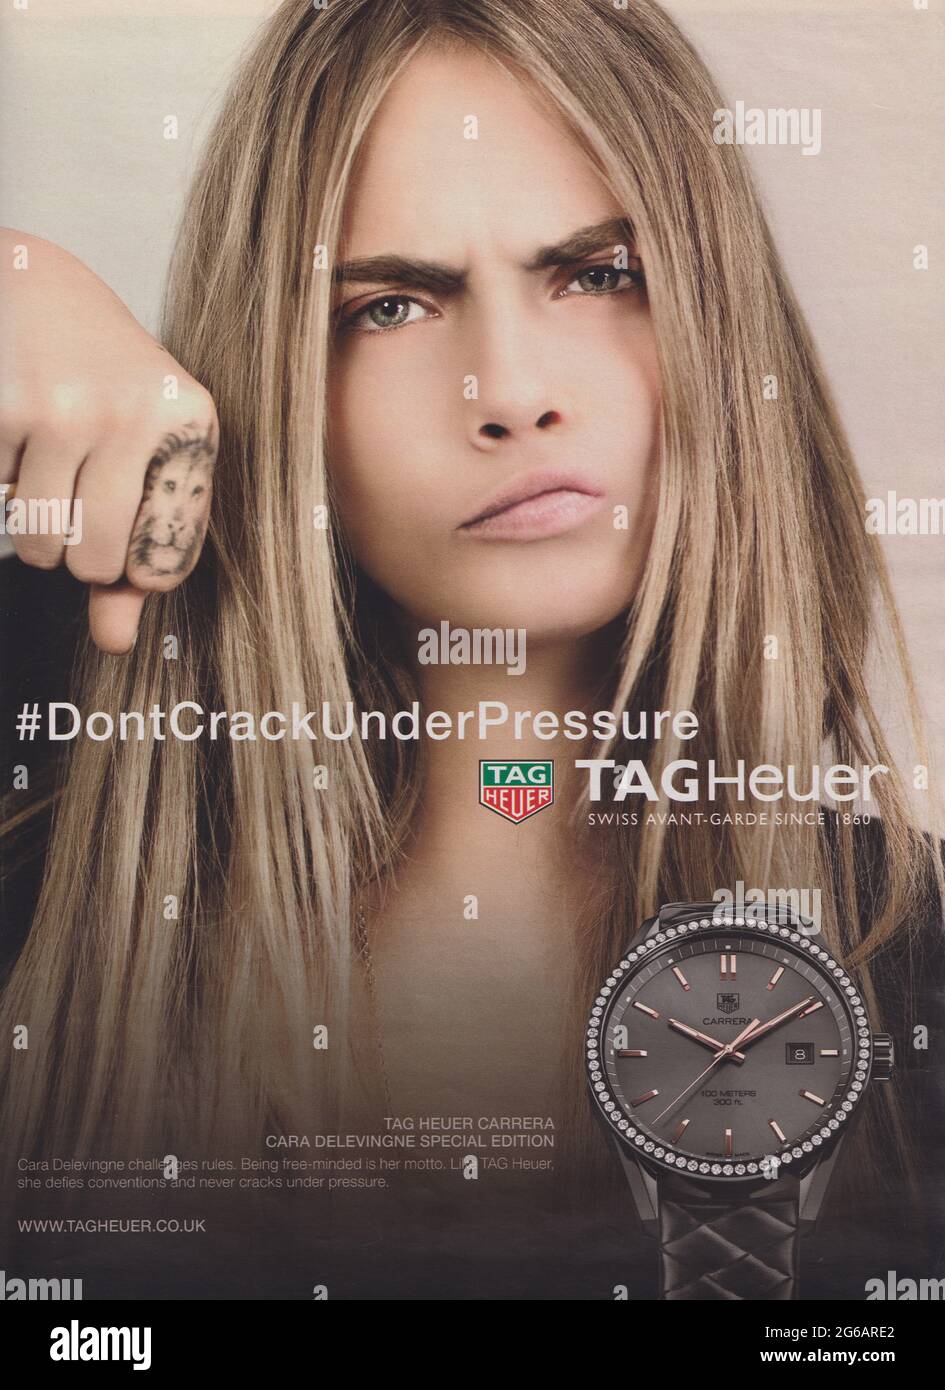 poster advertising TAG-Heuer watch with Cara Delevingne in magazine from 2015, DON'T CRACK UNDER PRESSUERE slogan, advertisement, creative advert Stock Photo